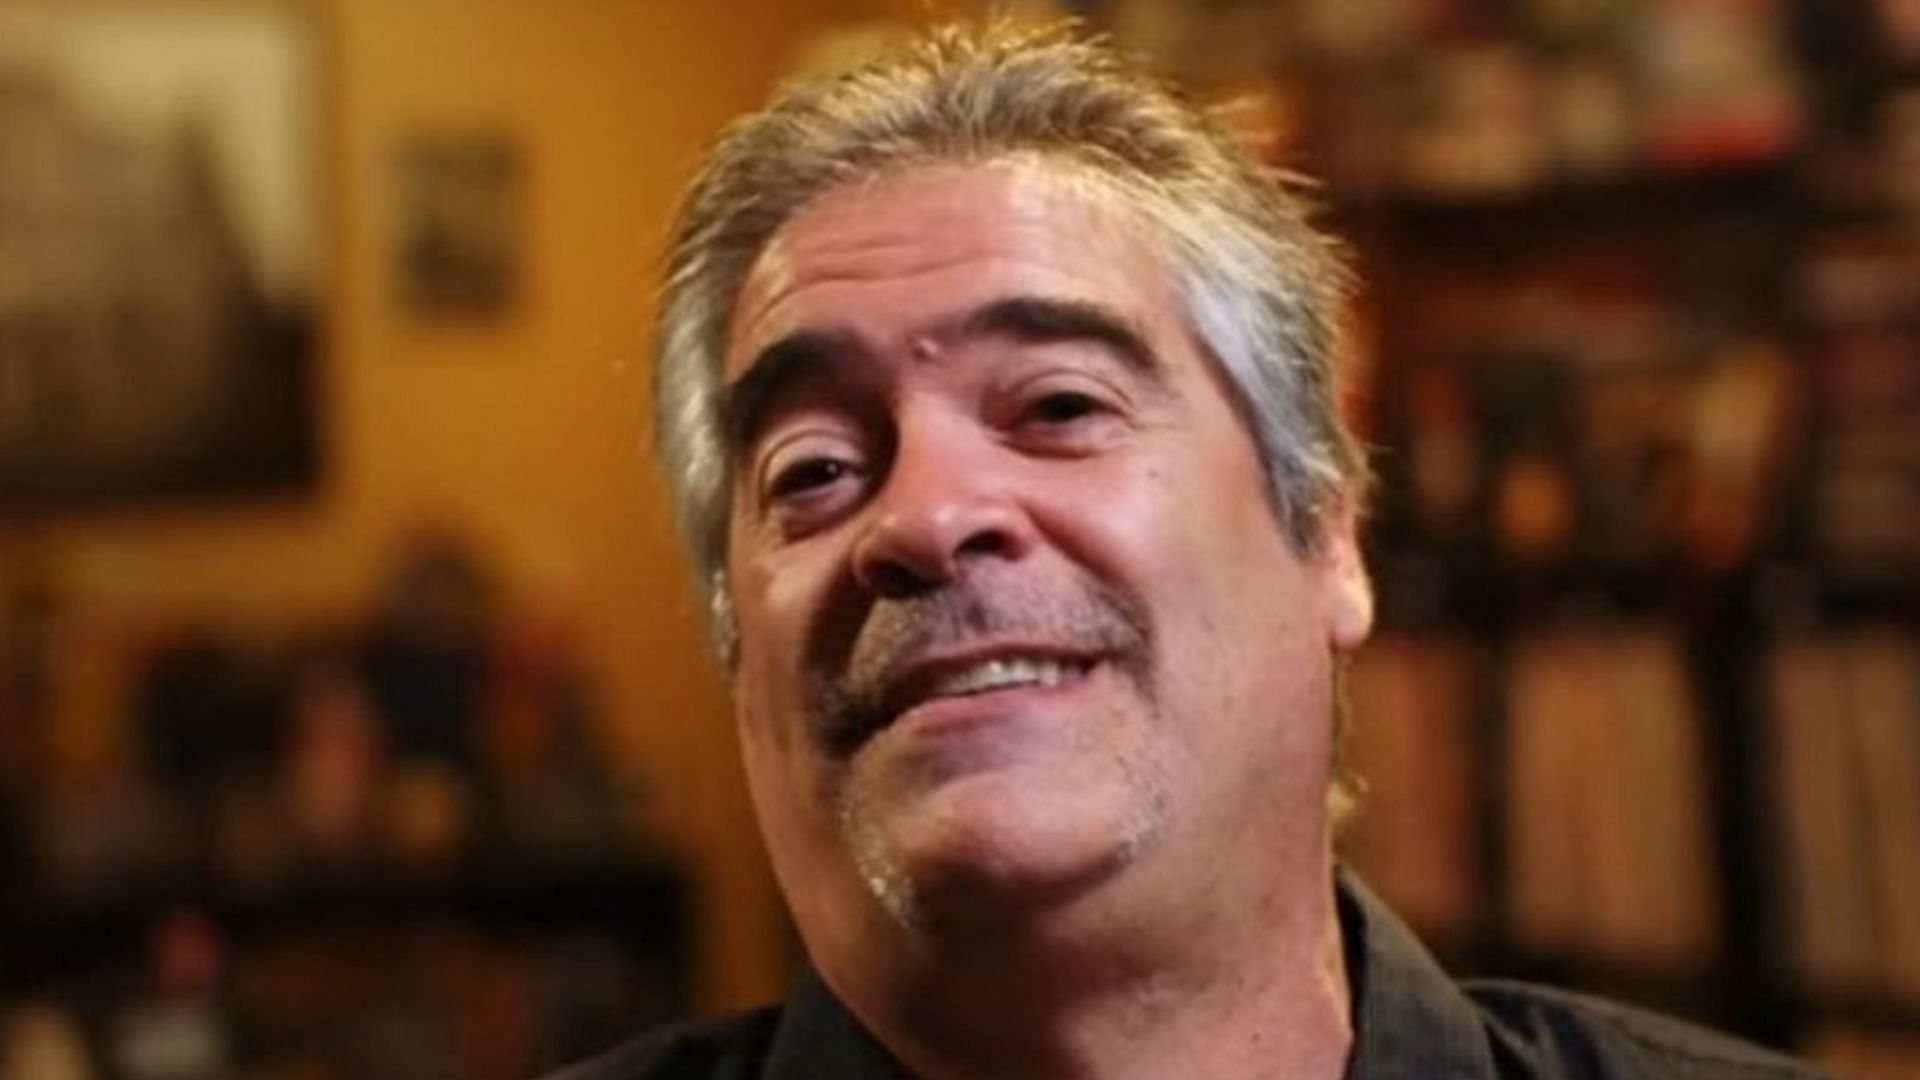 Which love story is Vince Russo invested in?